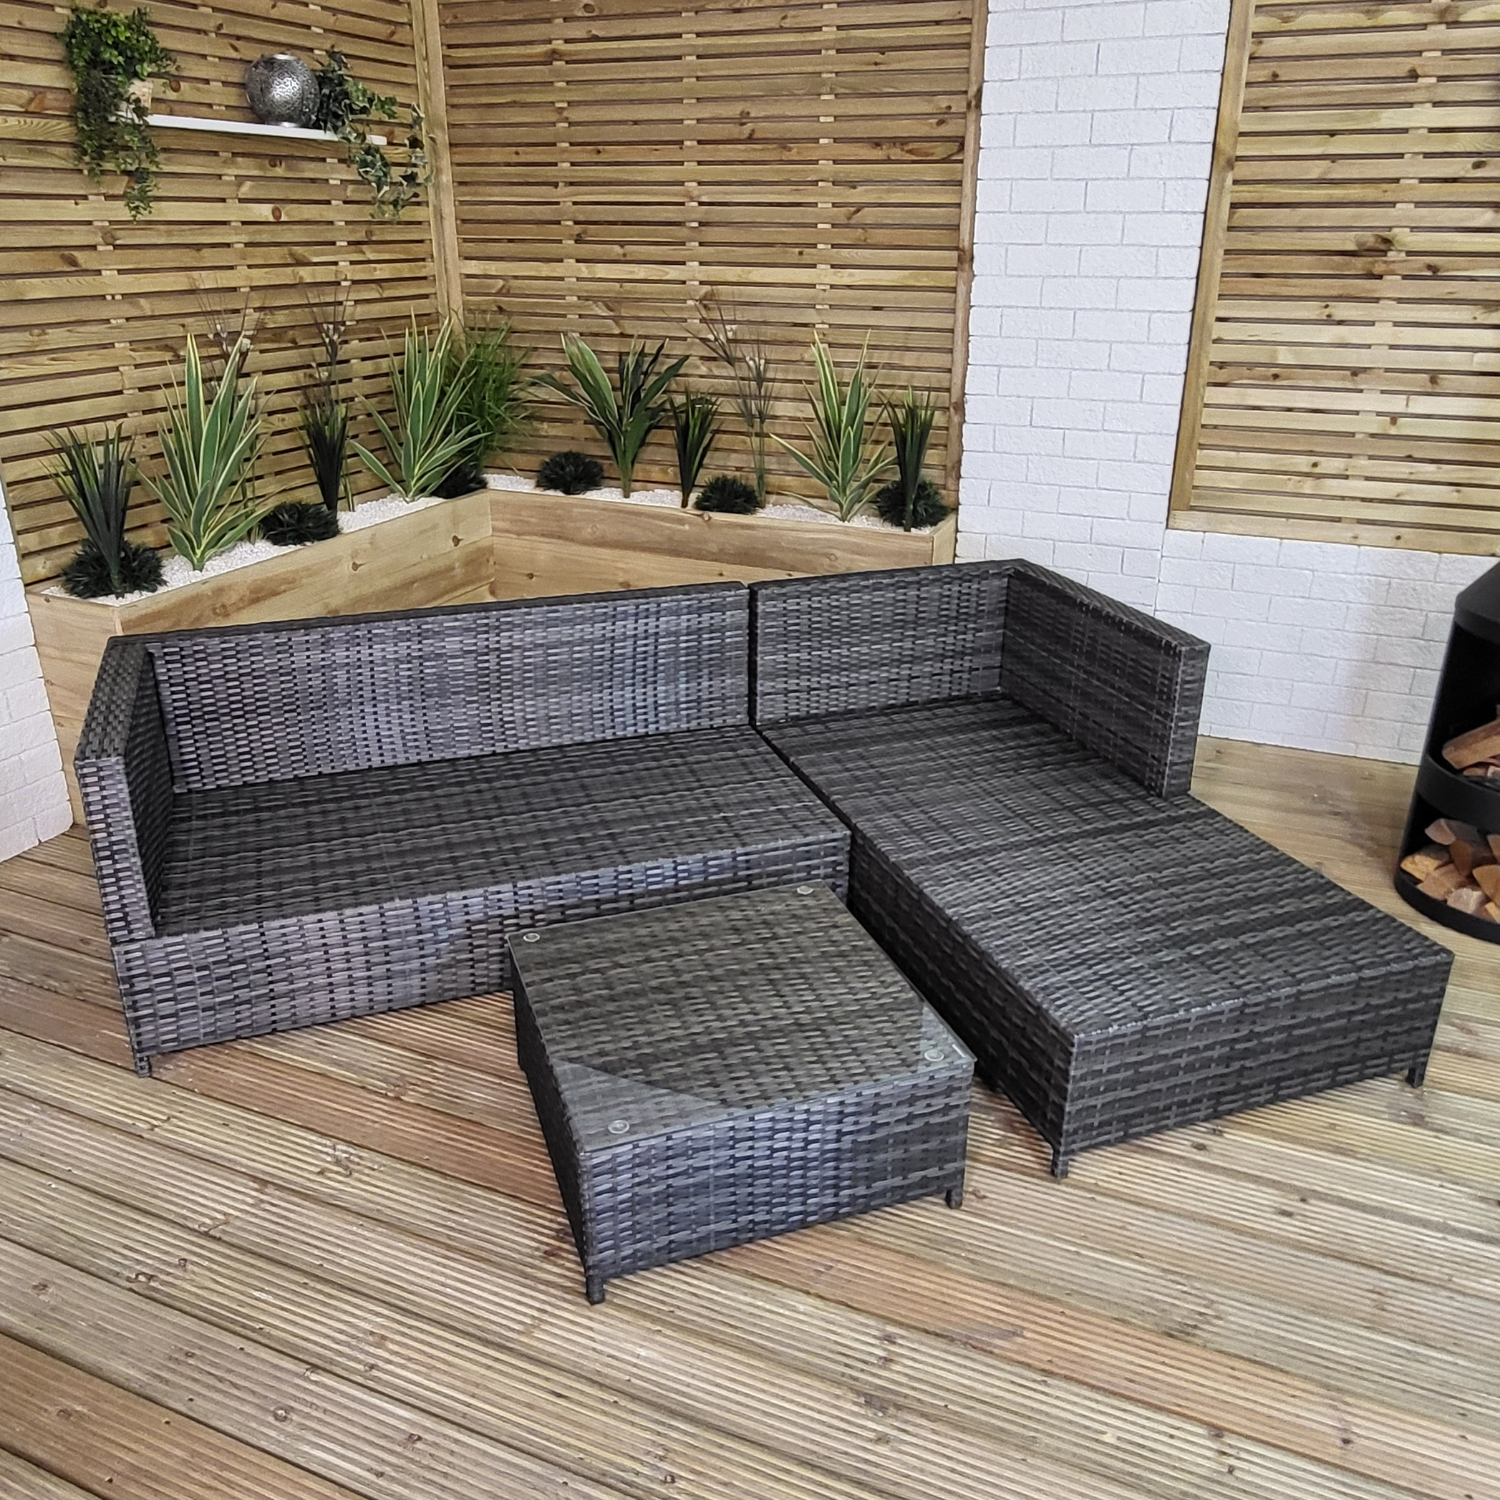 3PC 4 Seater Brown Rattan Chair Garden Sofa Set Daybed With Grey Cushions and Glass Top Coffee Table 